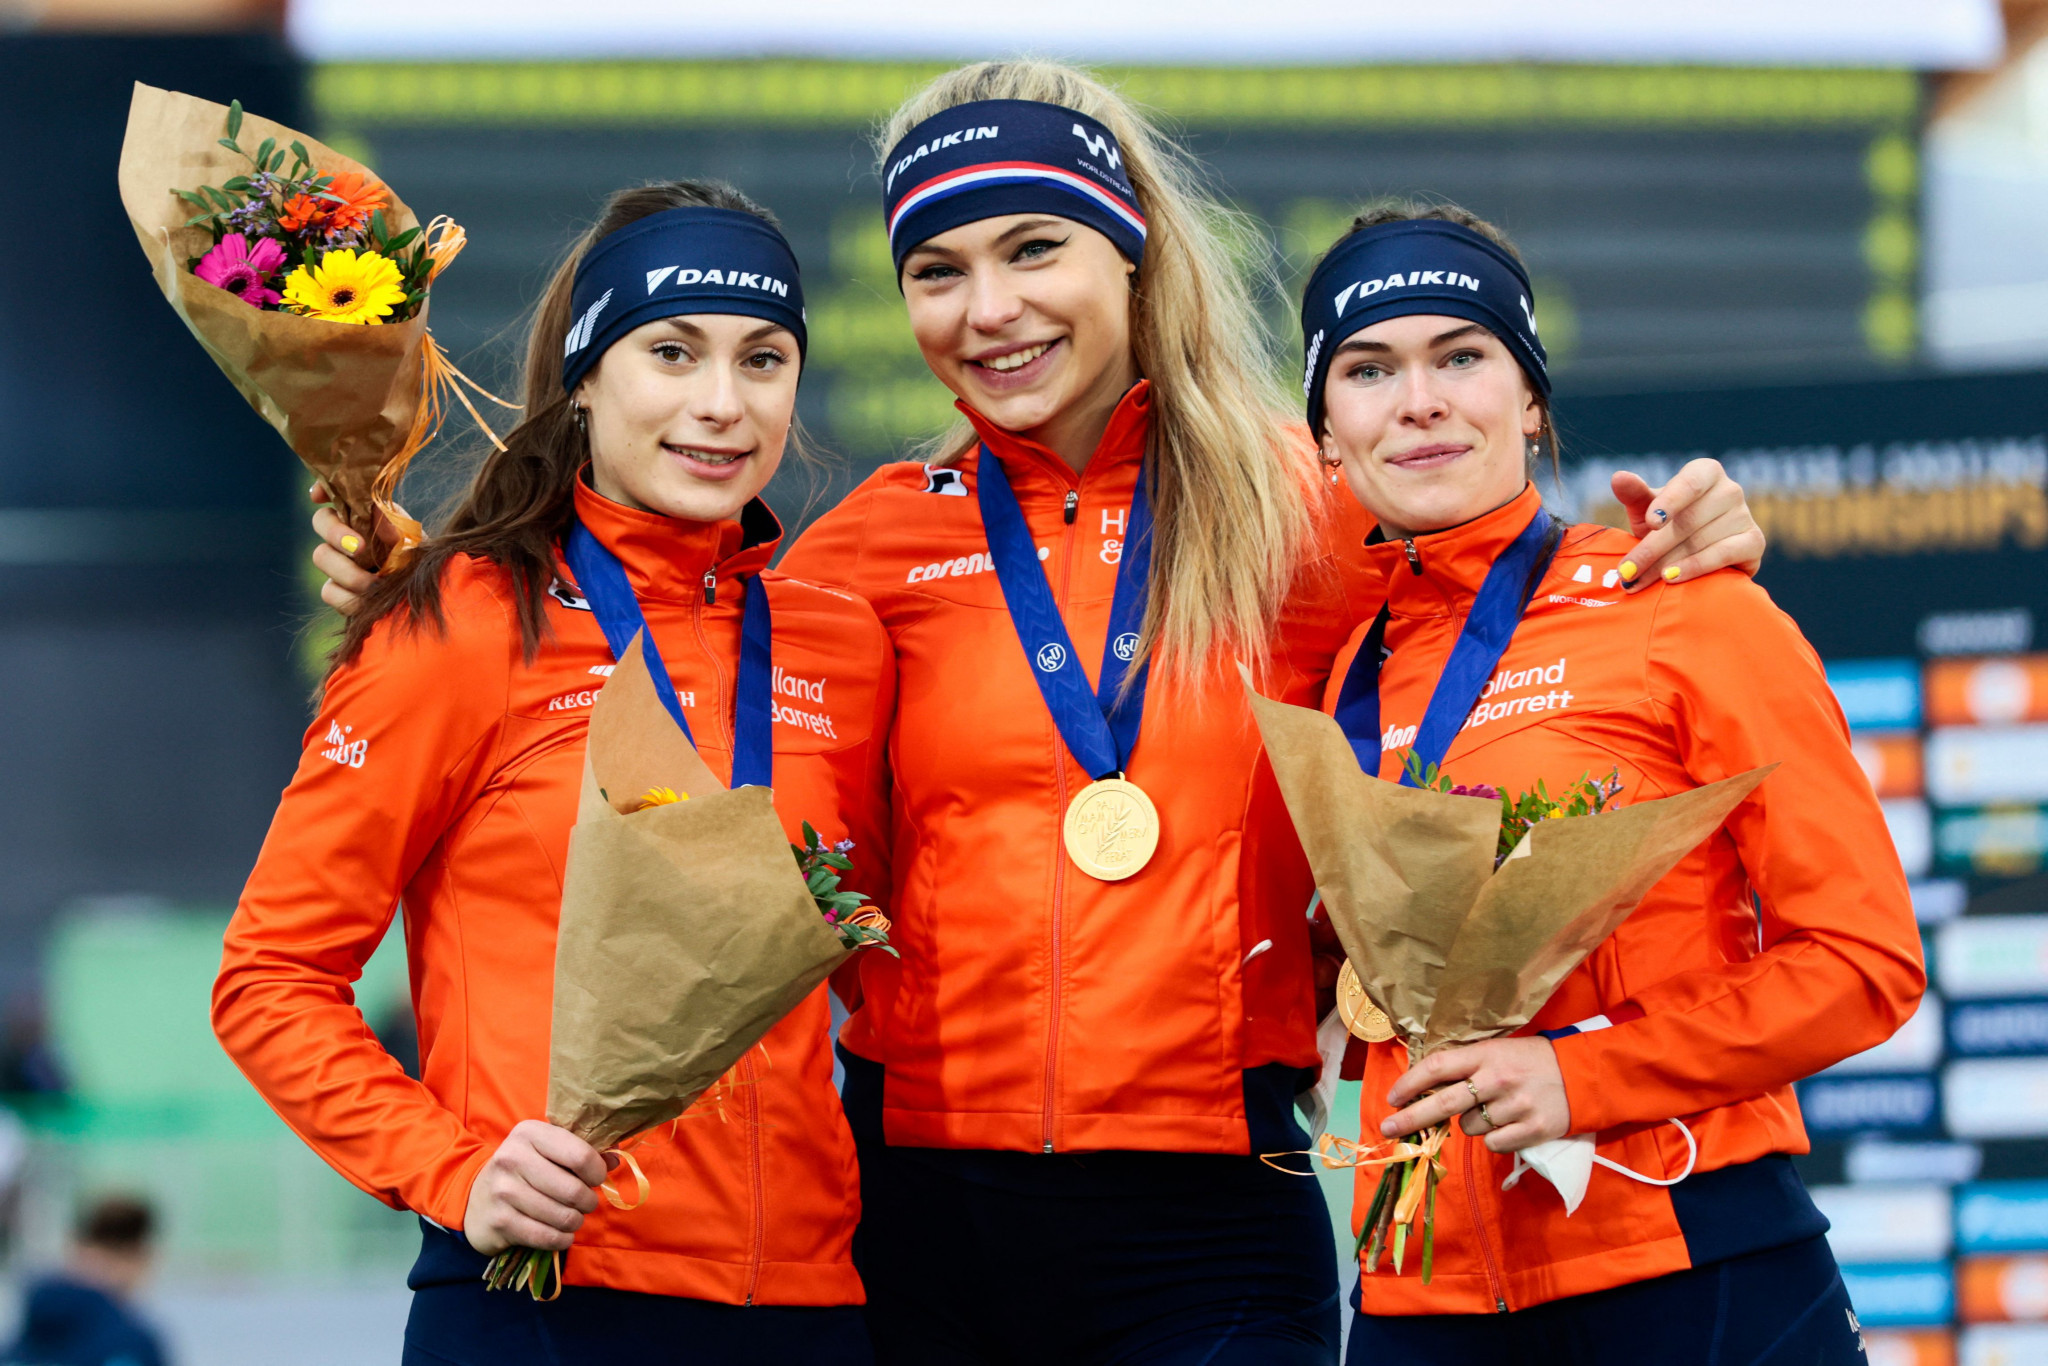 Netherlands and Norway win team sprint events at World Speed Skating Championships